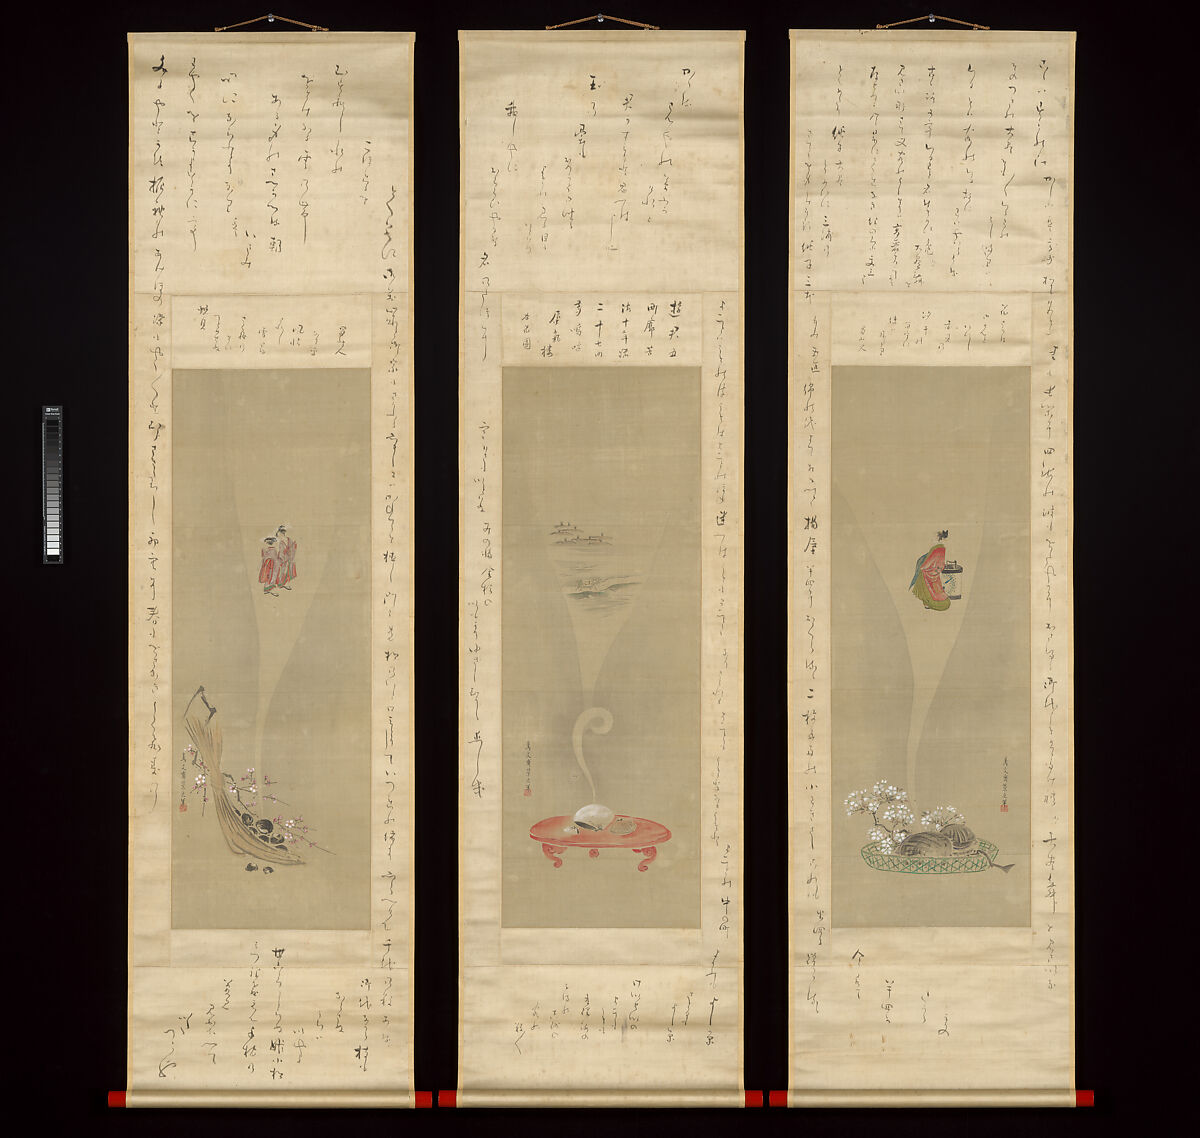 Shellfish and Apparitions of the Yoshiwara Pleasure Quarter, Chōbunsai Eishi (Japanese, 1756–1829), Triptych of hanging scrolls with inscribed mountings; painting: ink and color on silk; calligraphy: ink on silk mounting fabric, Japan 